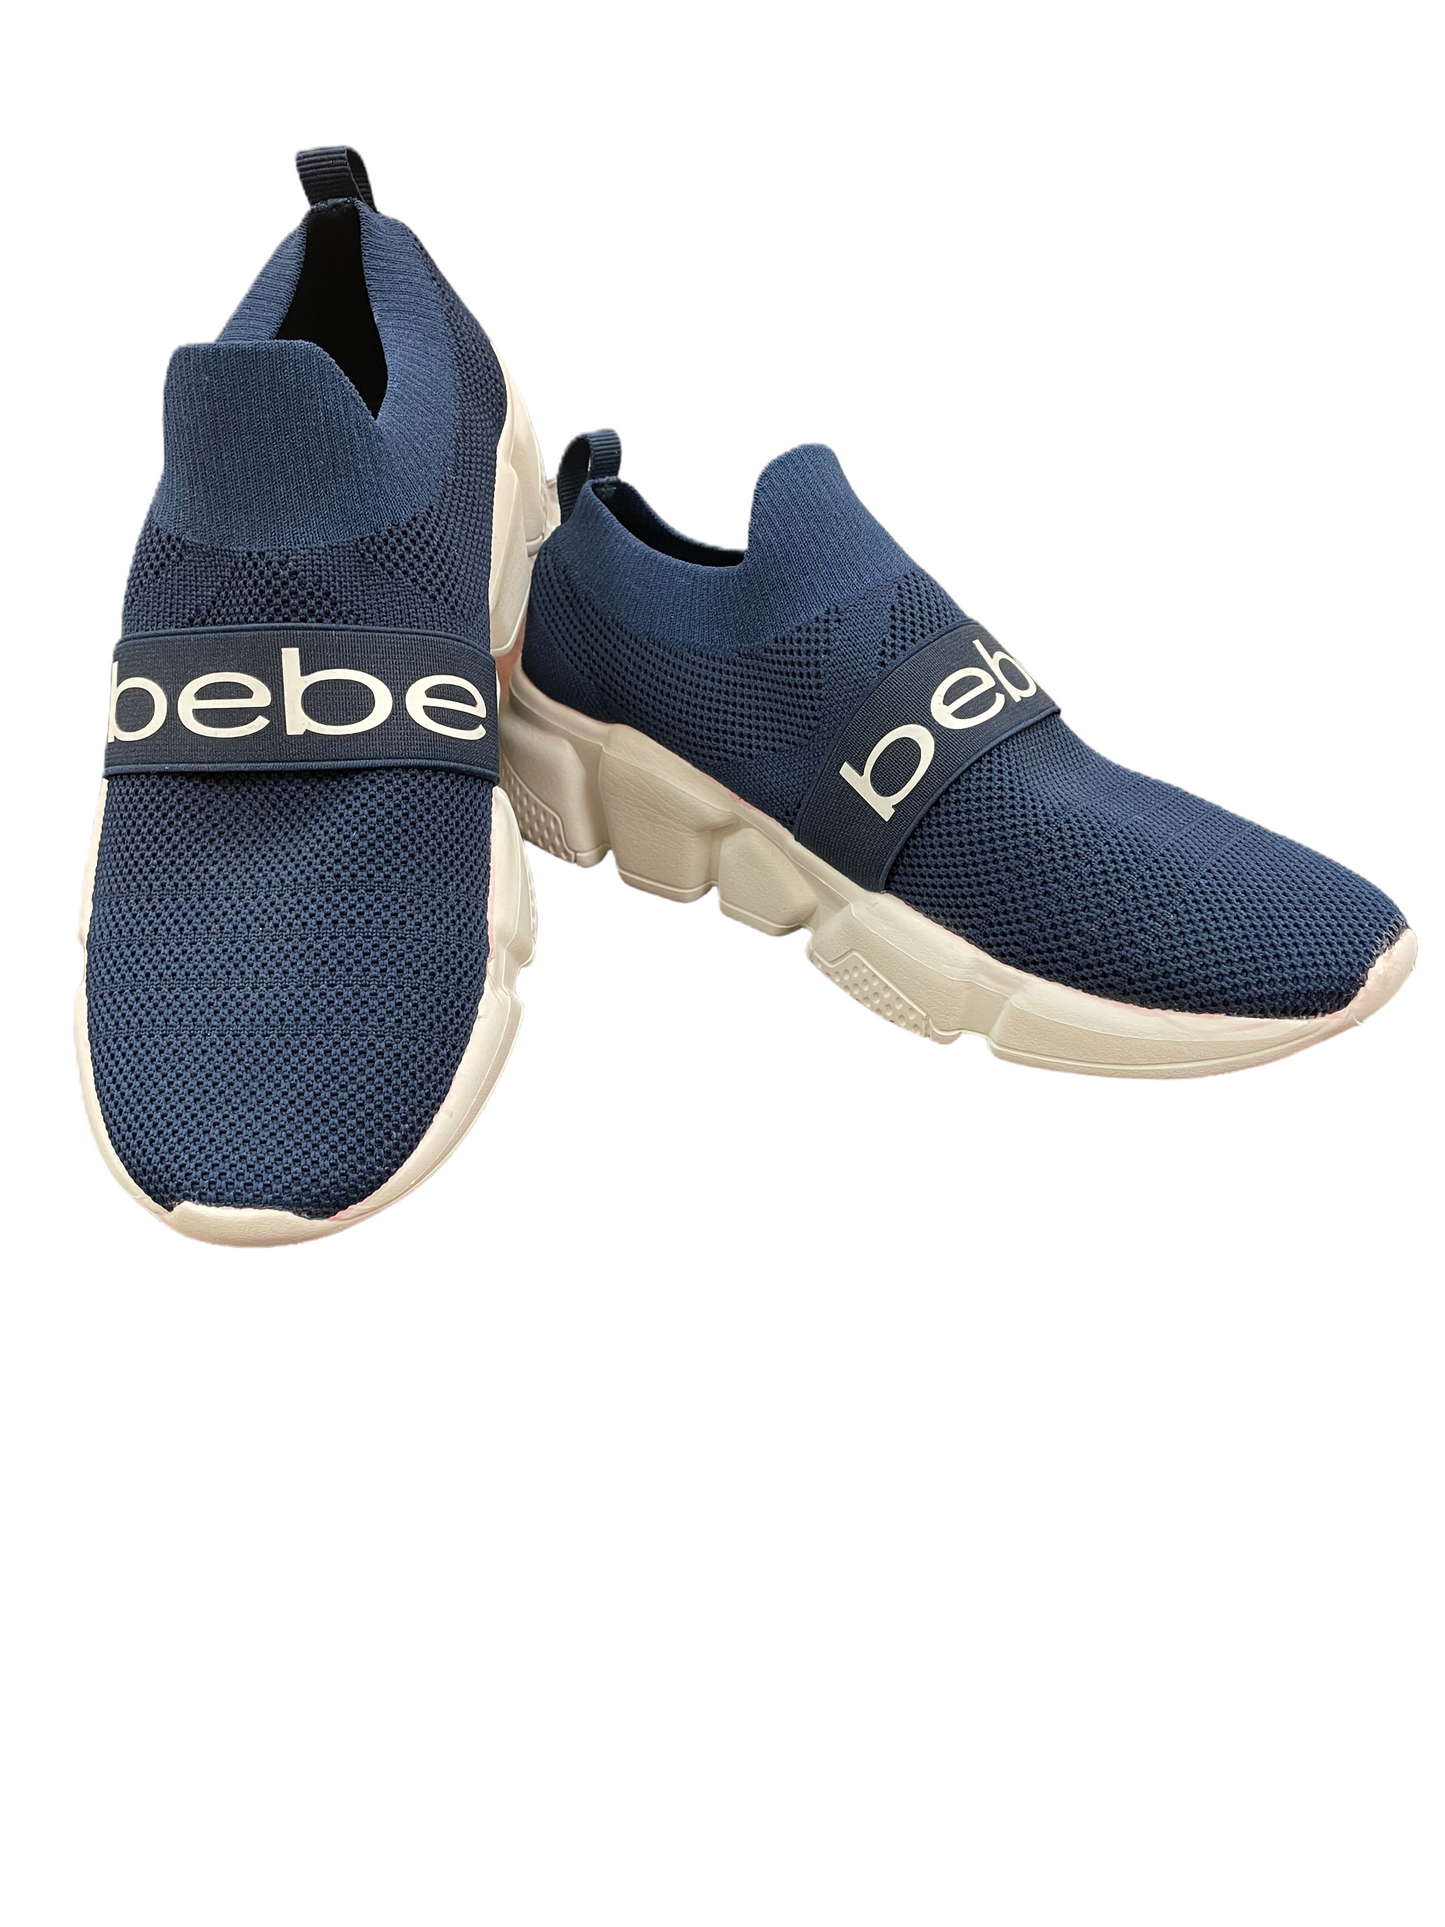 Shoes Athletic By Bebe  Size: 6.5